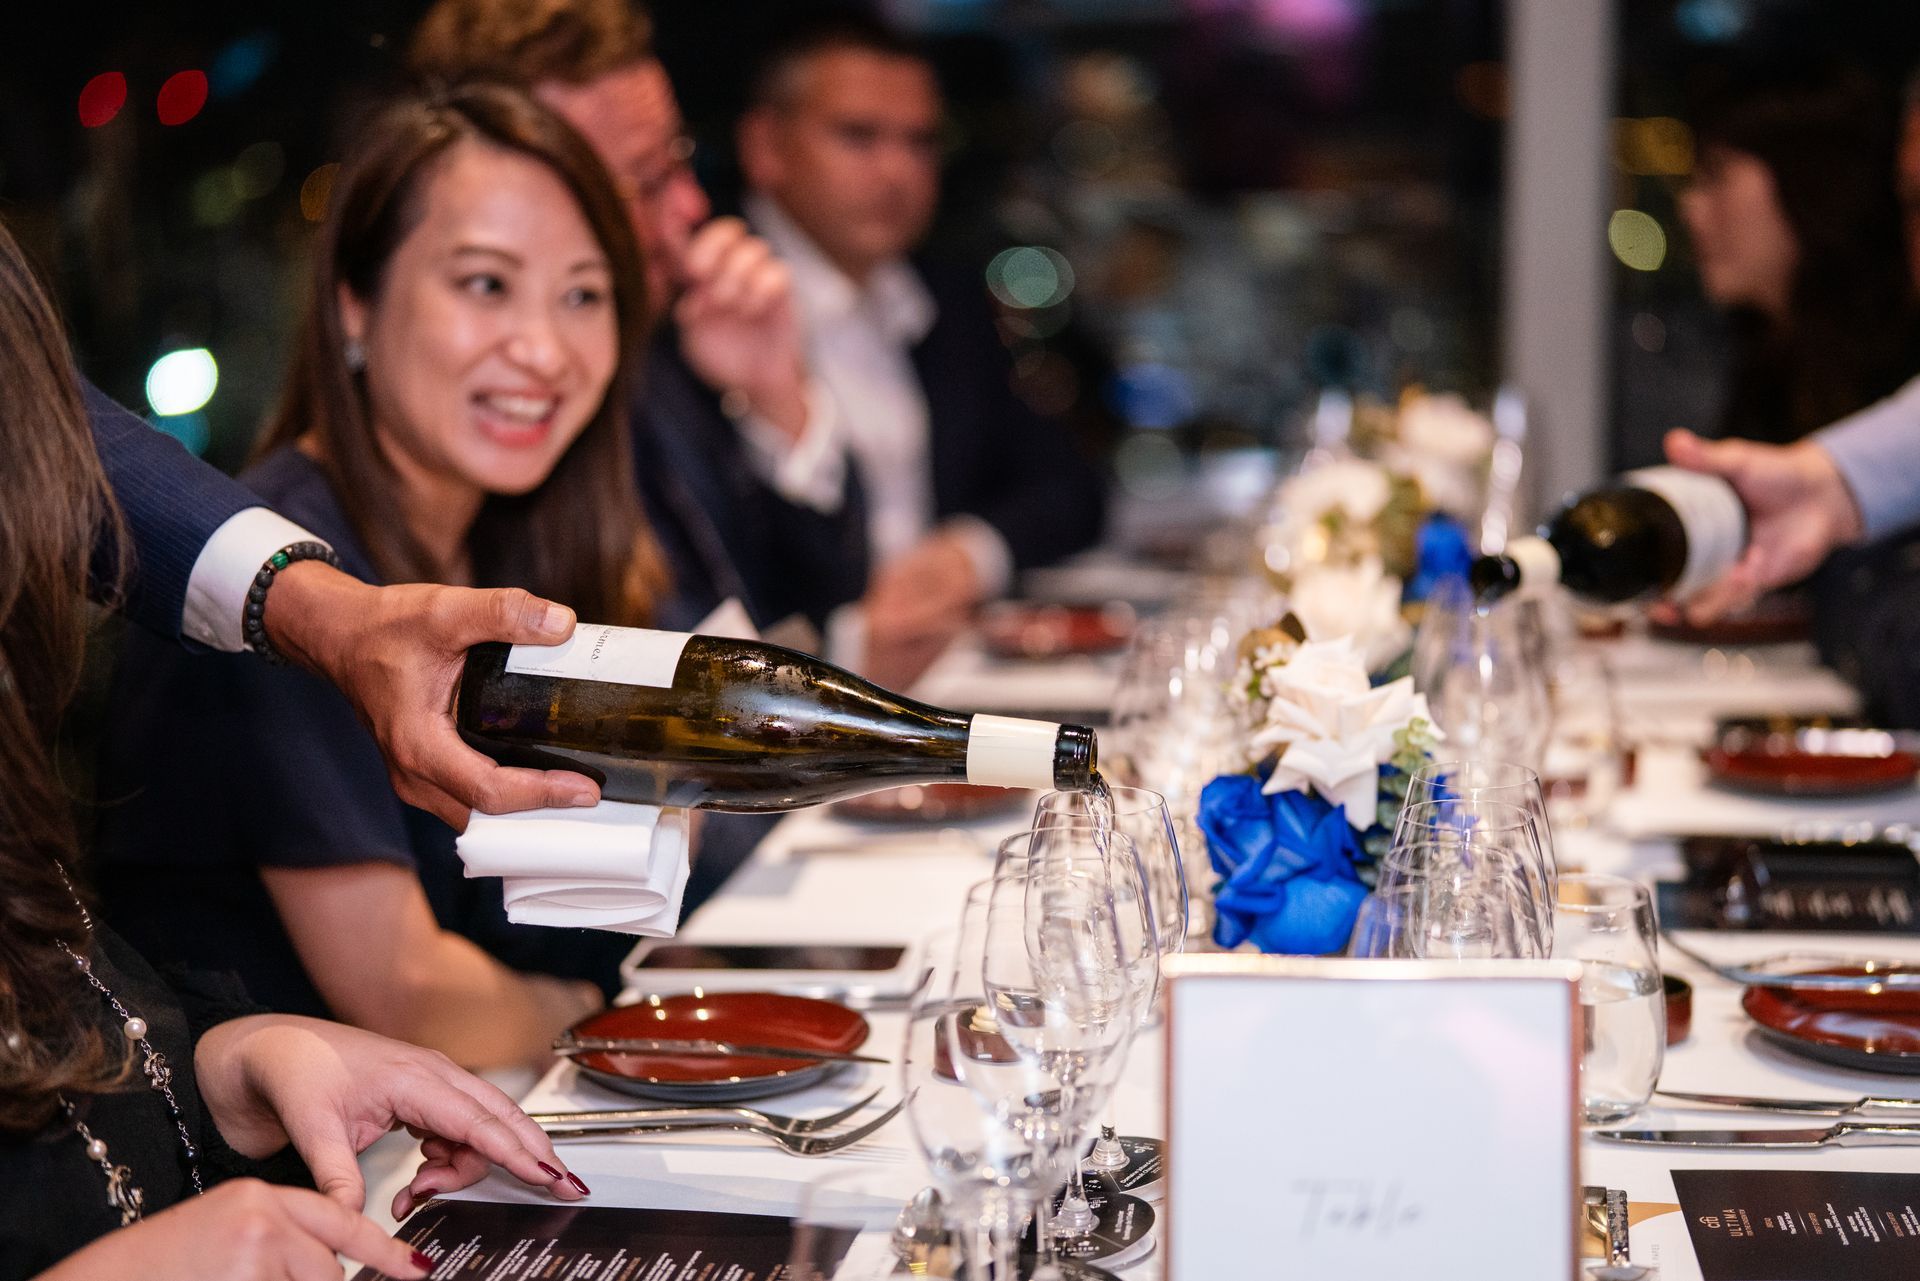 Corporate wine dinner in ION, Singapore, sommelier service and pairing dinner